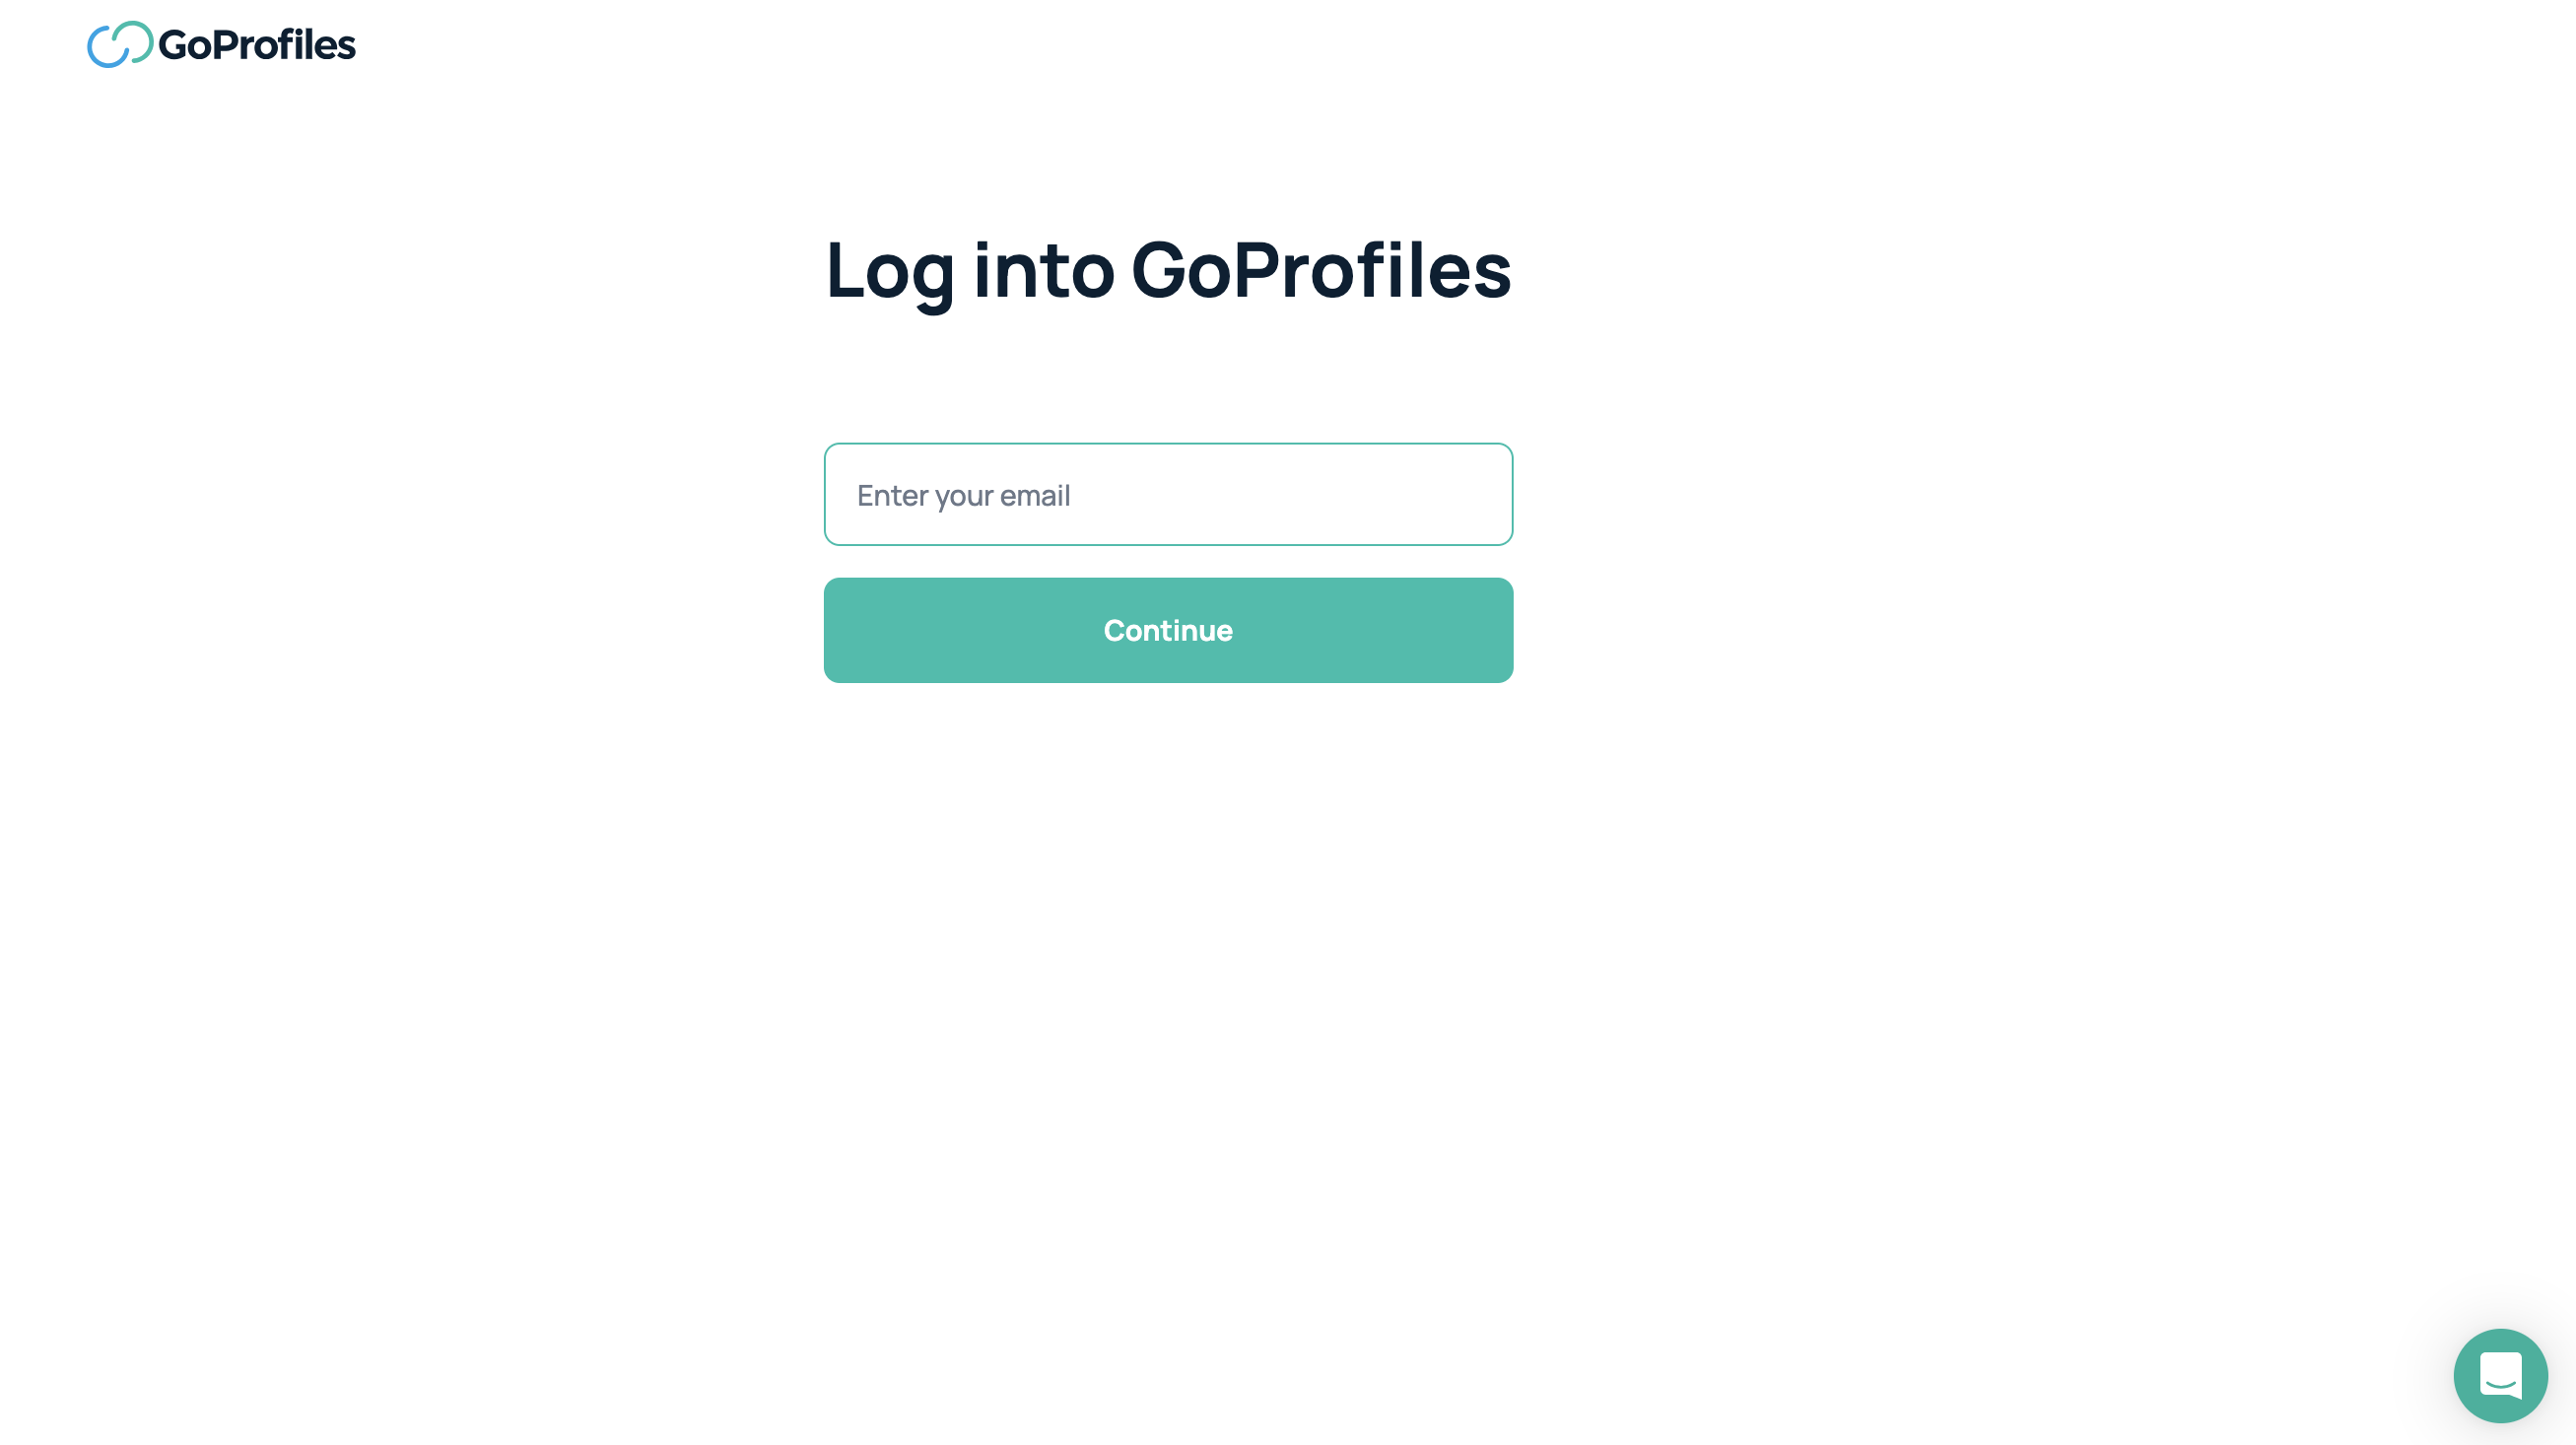 GoProfiles login page showing the support chat in the bottom right corner of the page